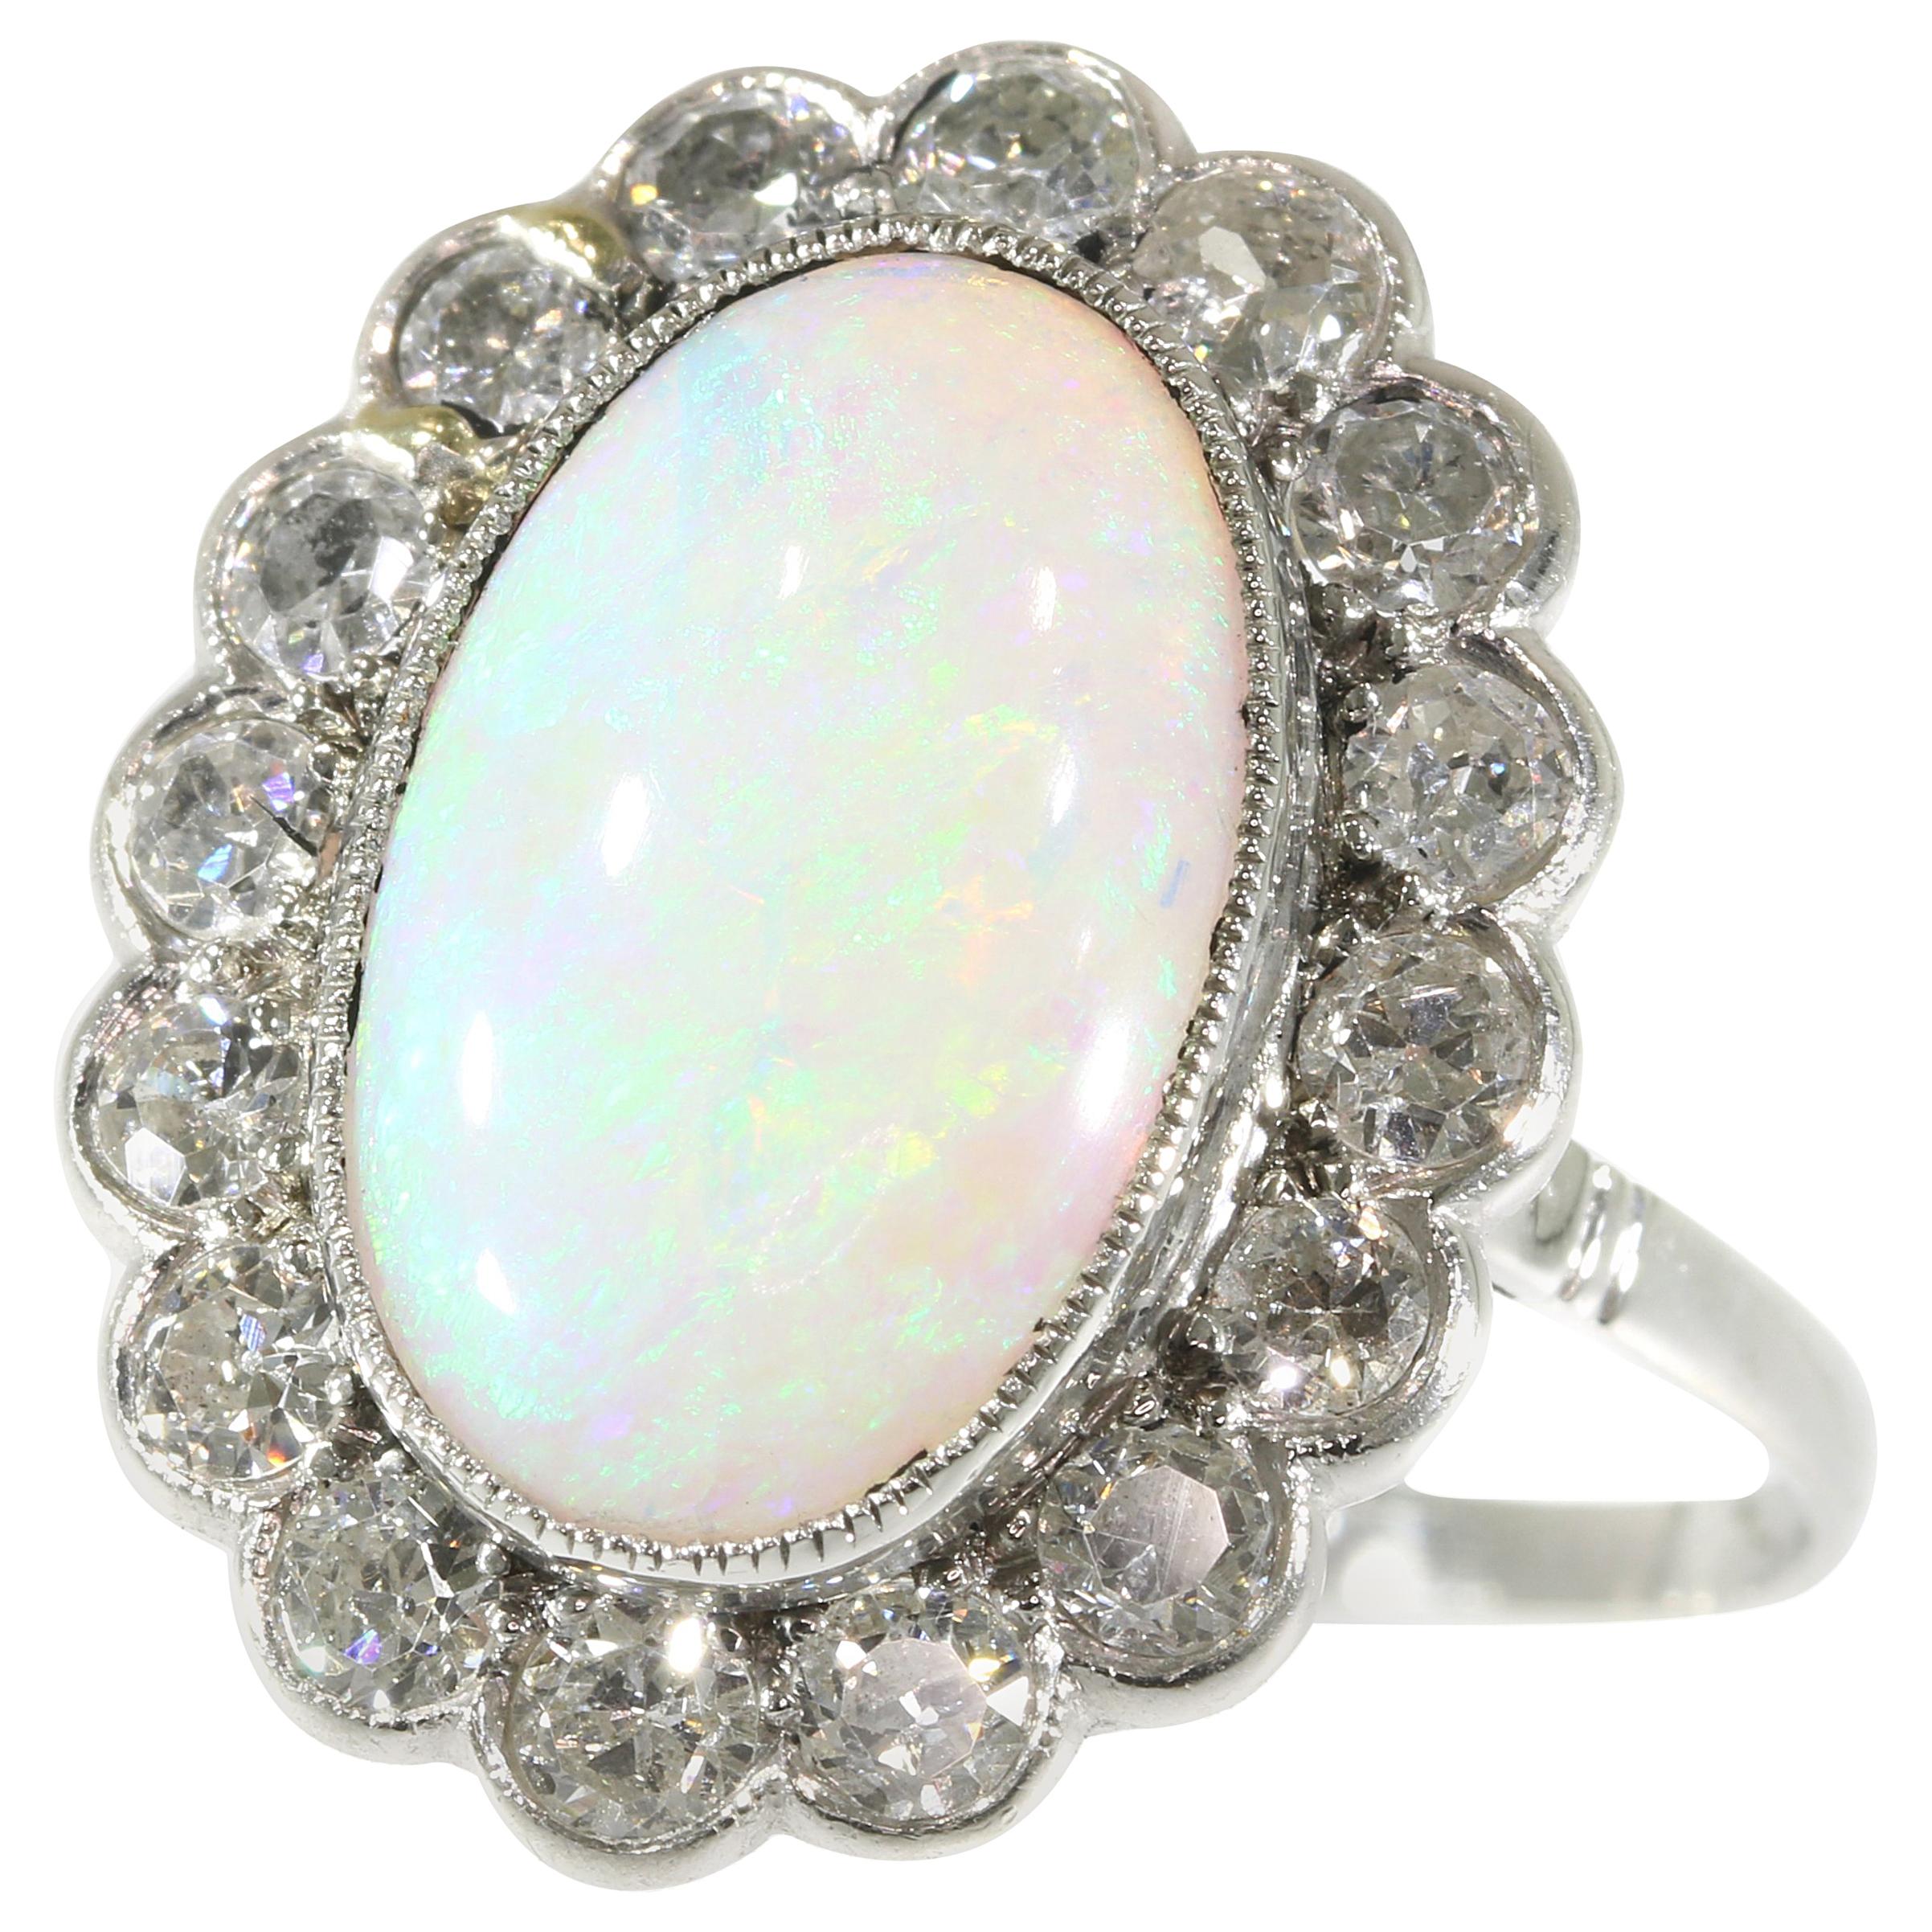 Vintage Diamond Opal Engagement Ring with a Total Carat Weight of 5.12 For Sale